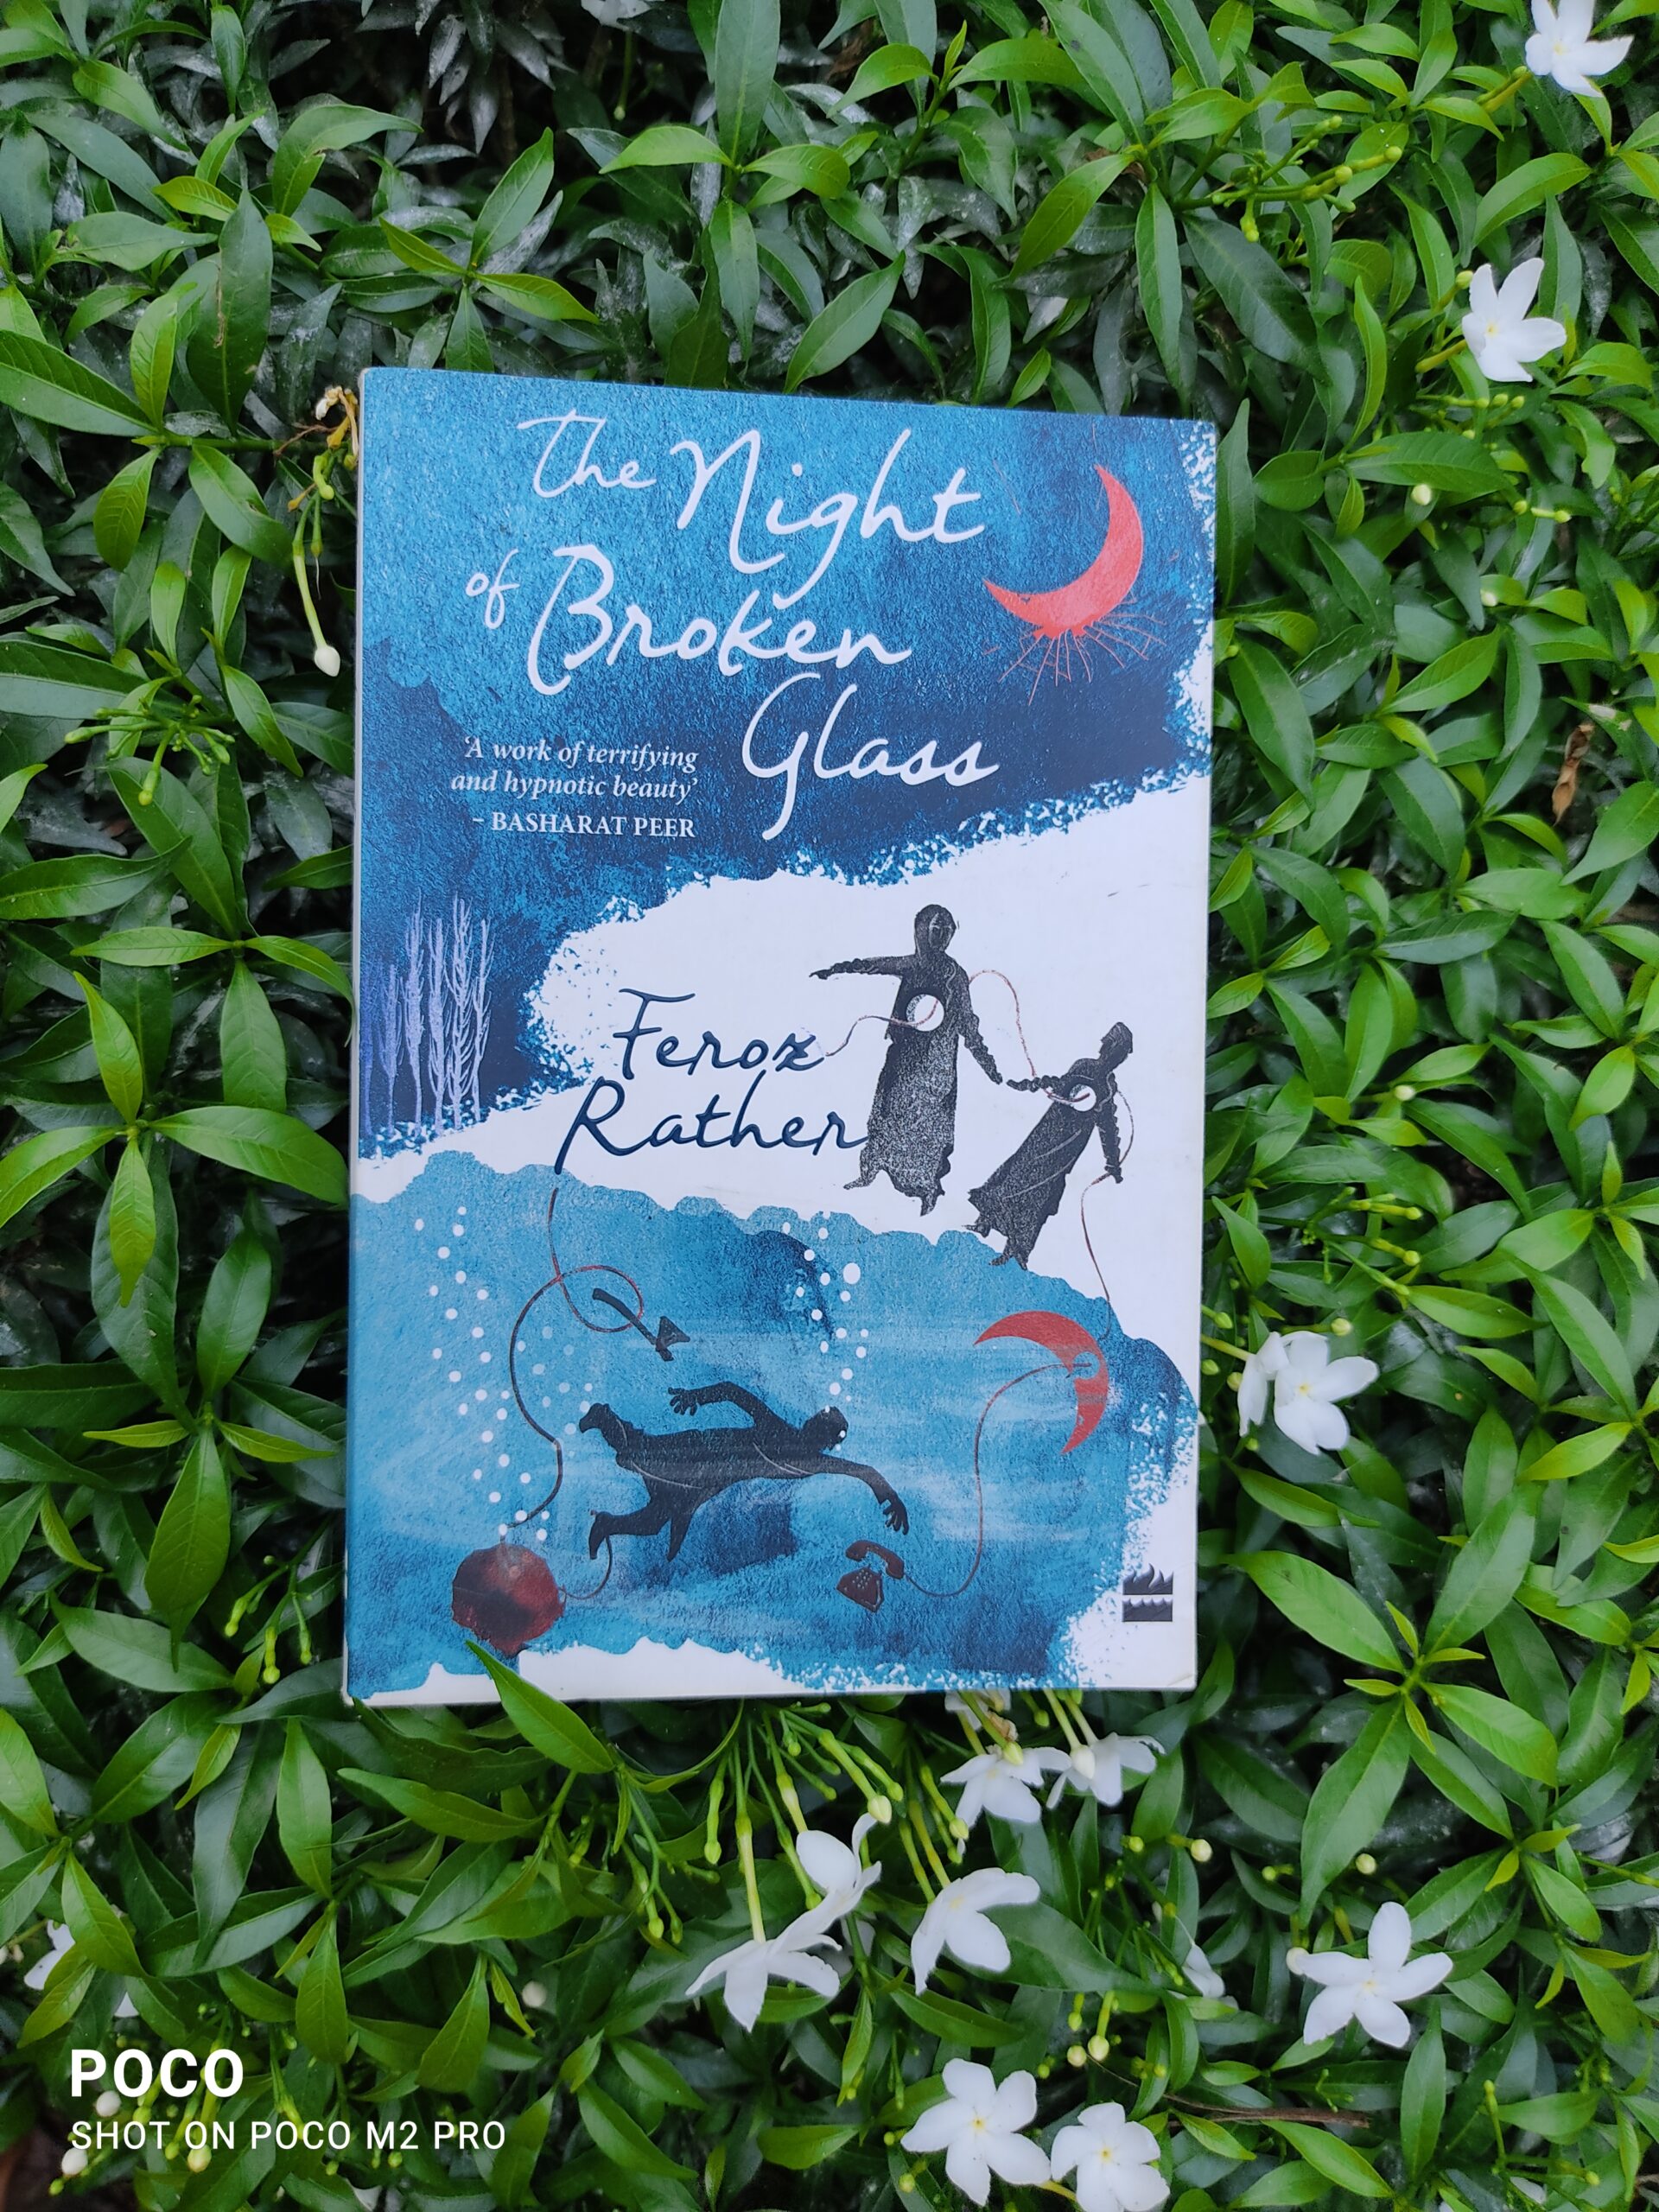 The Night of broken Glass, Feroz Rather, Book Review